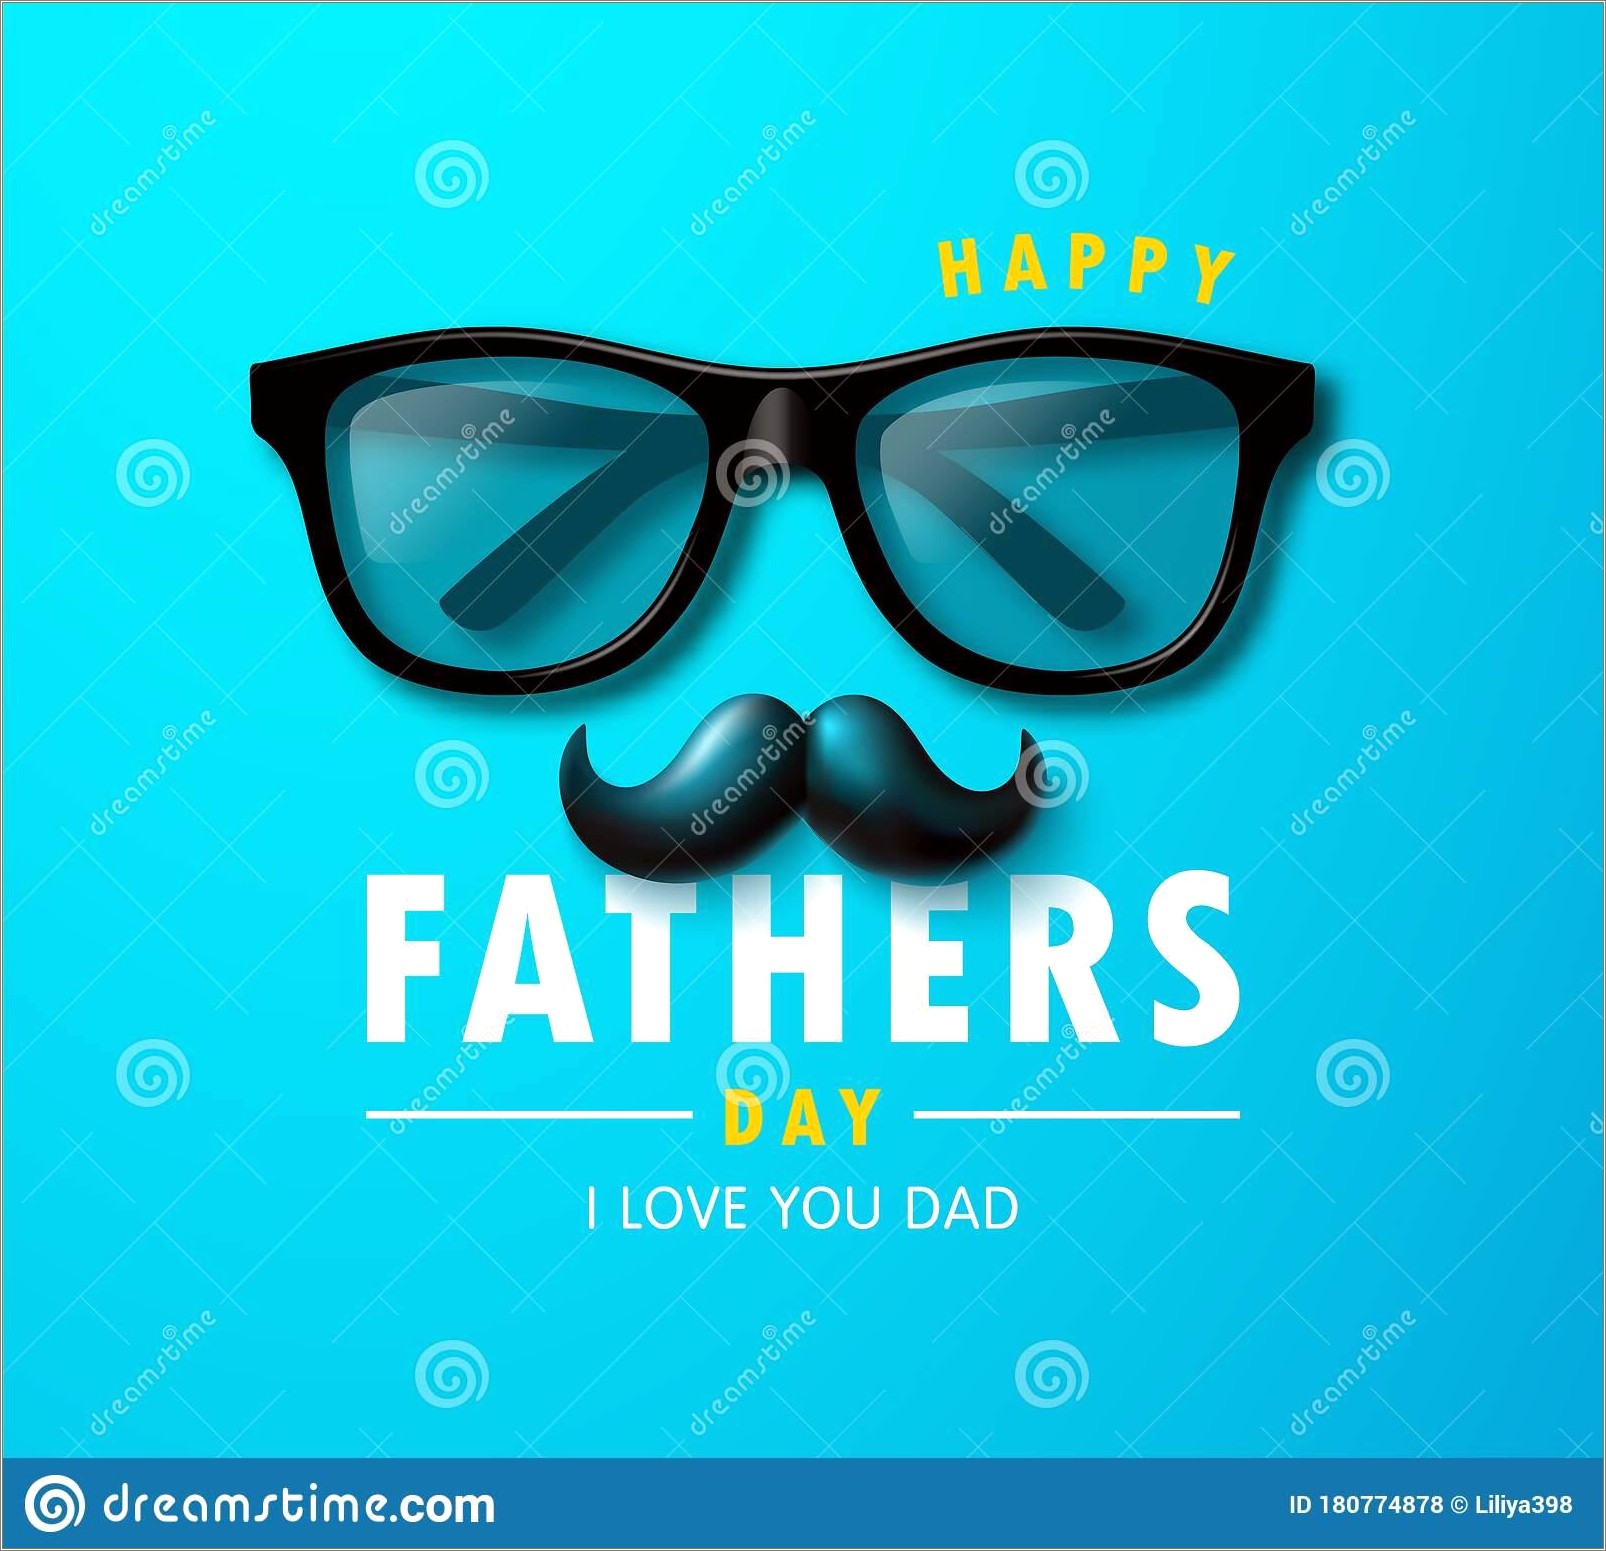 Father's Day Free Invitation Templates With Mustache